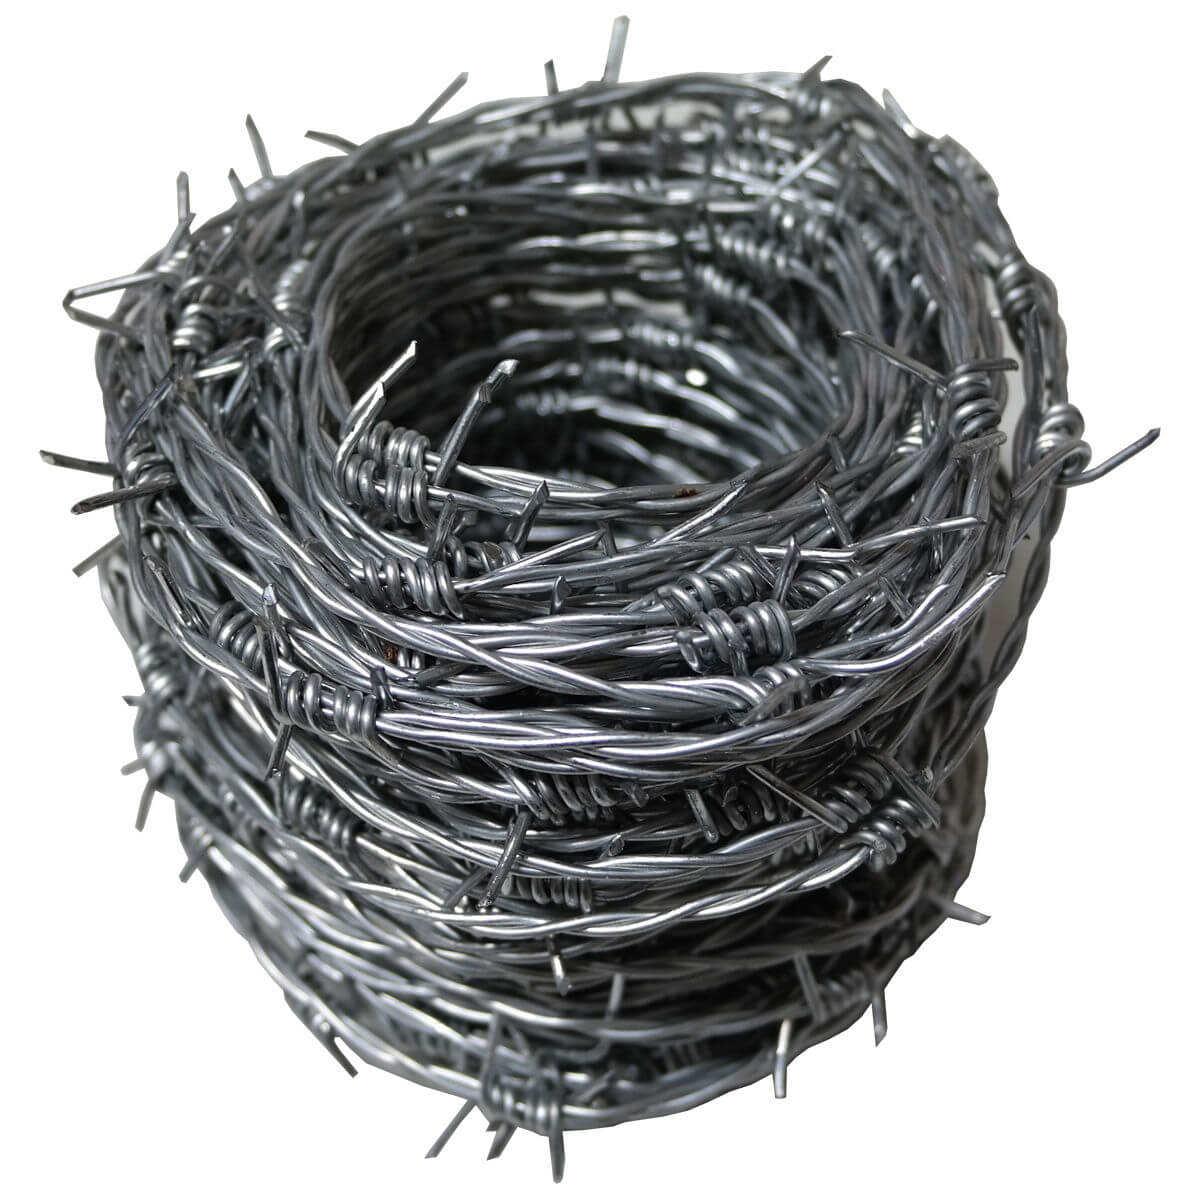 Protective Fencing Solution: Choosing the Right Type of Barbed Wire